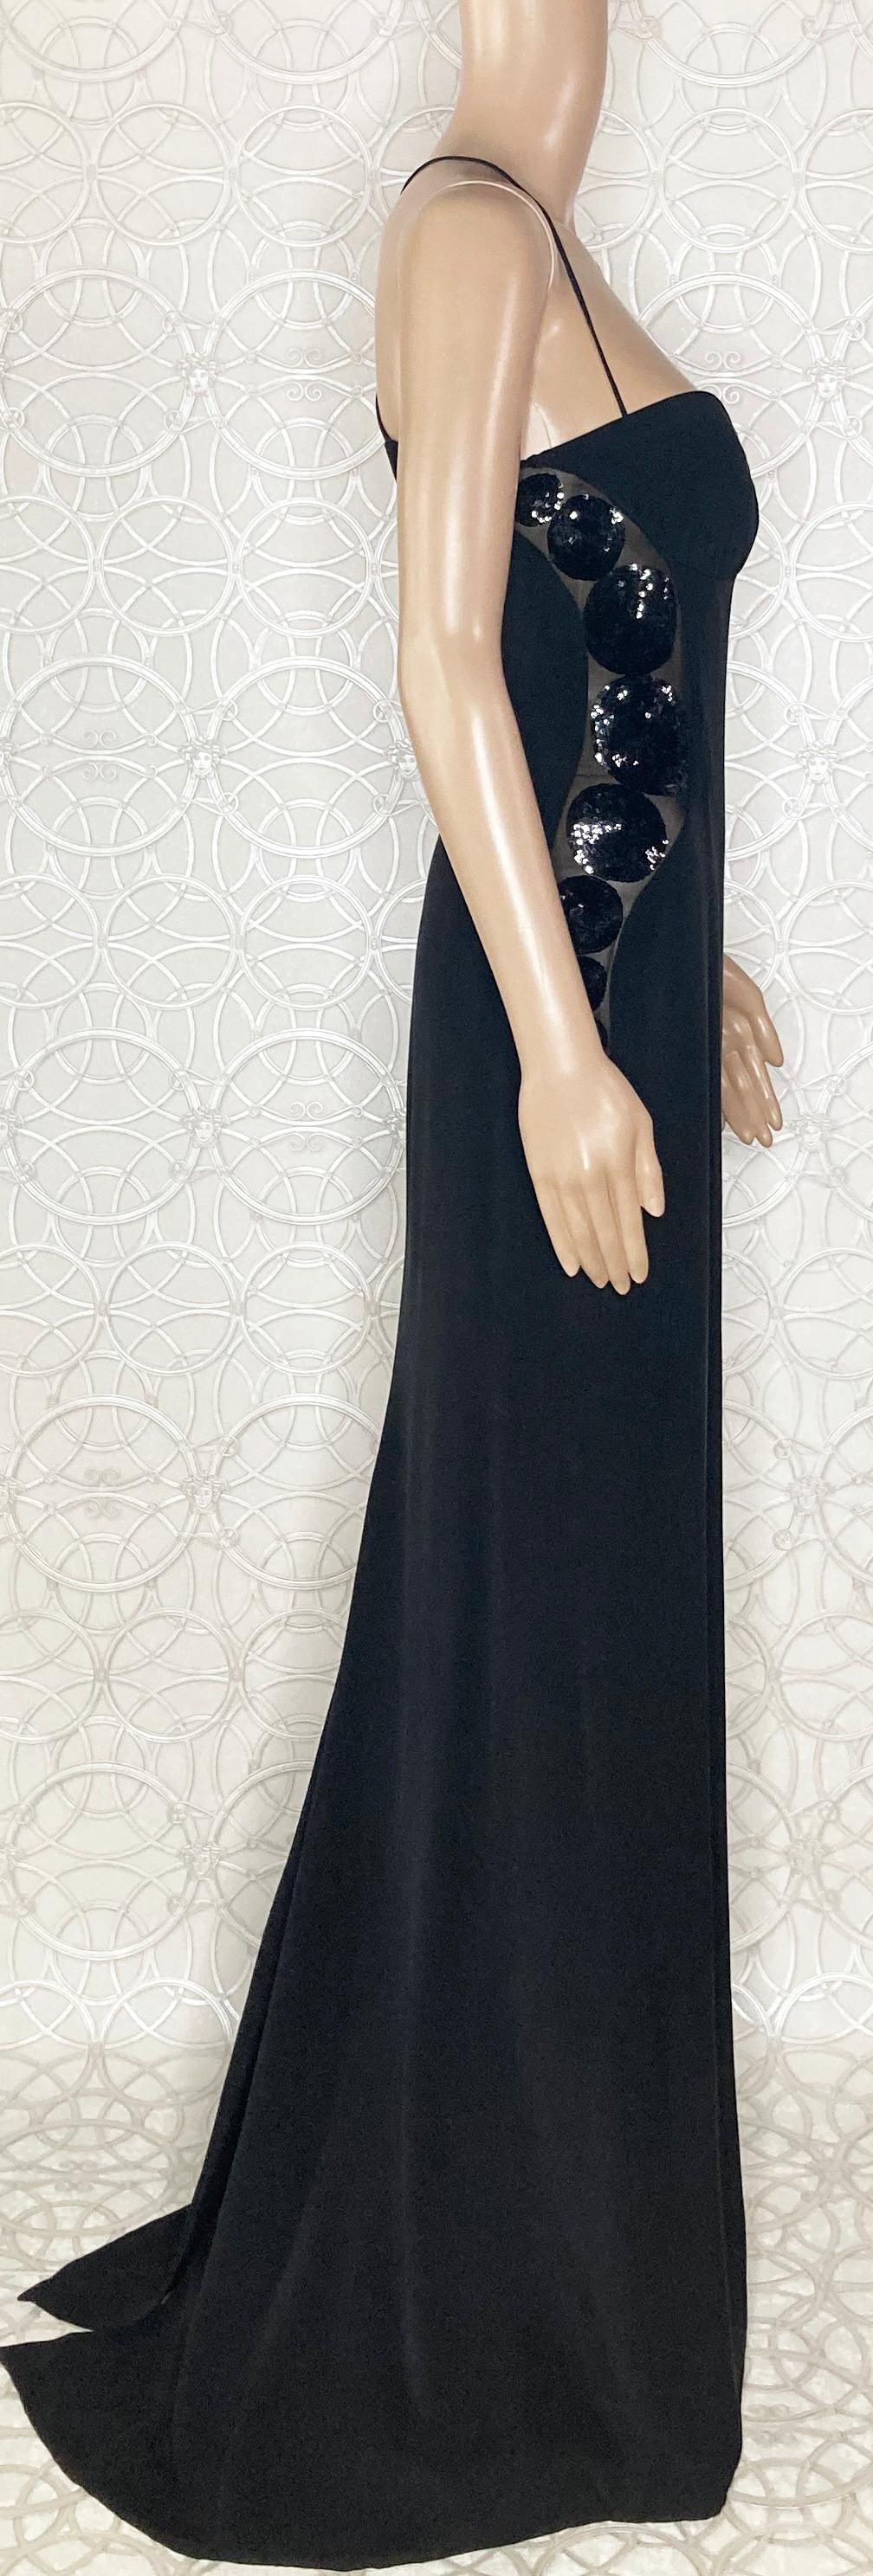 VERSACE BLACK PAILLETE DETAIL and OPEN BACK SILK LONG GOWN Dress 38 -2 For Sale 2